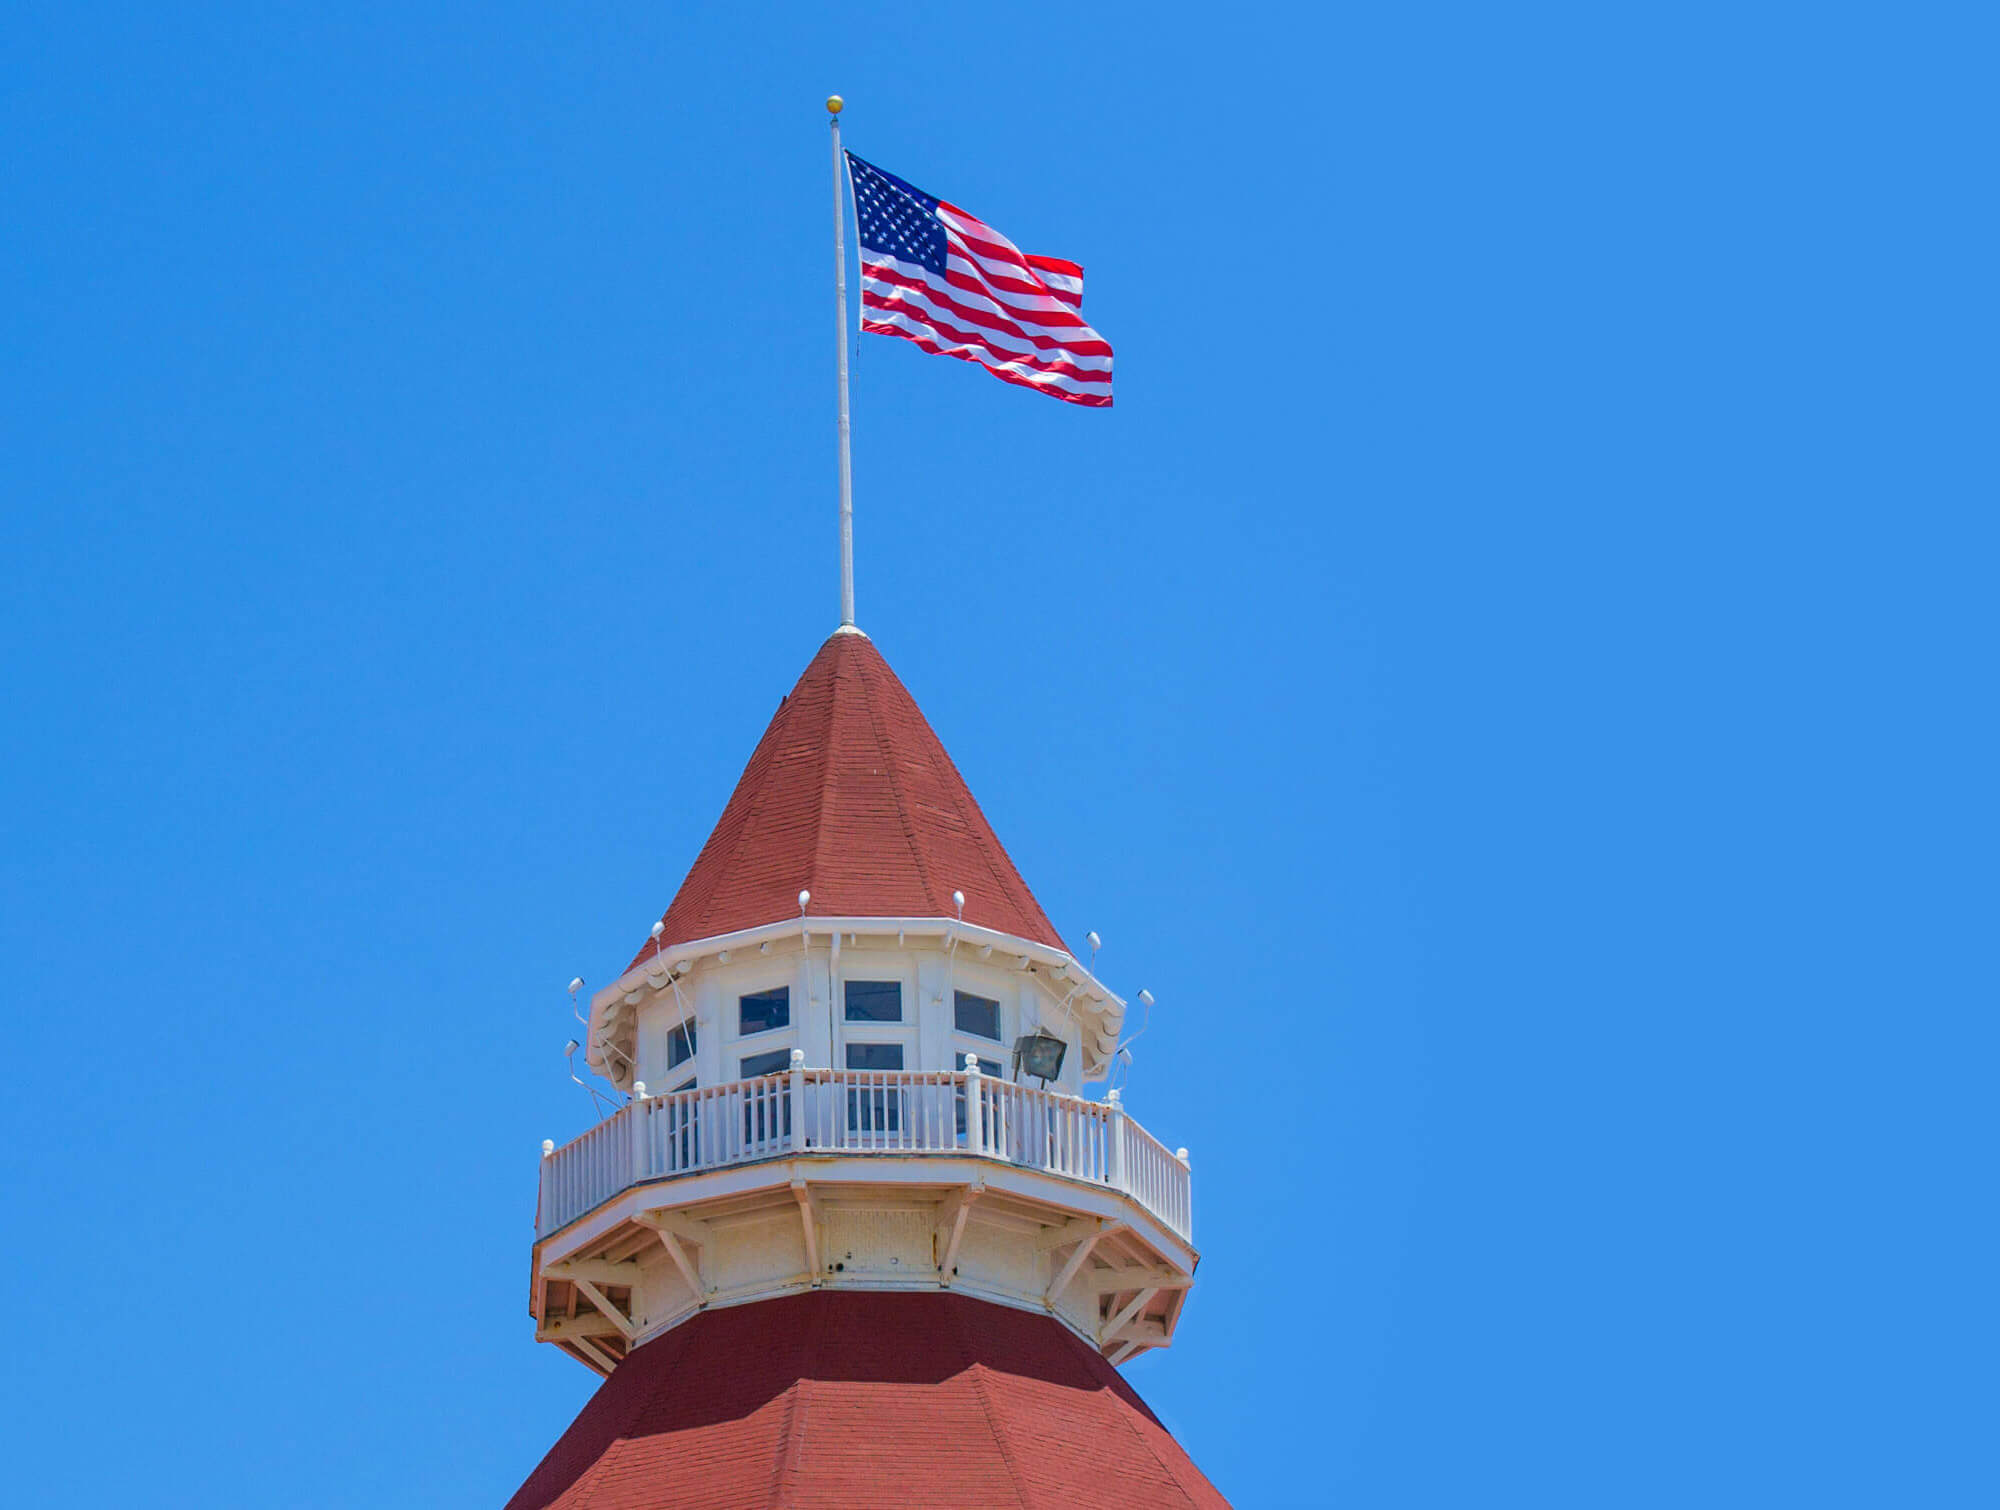 A close-up of one of the several spires on the roof of the Hotel del Coronado in San Diego, CA